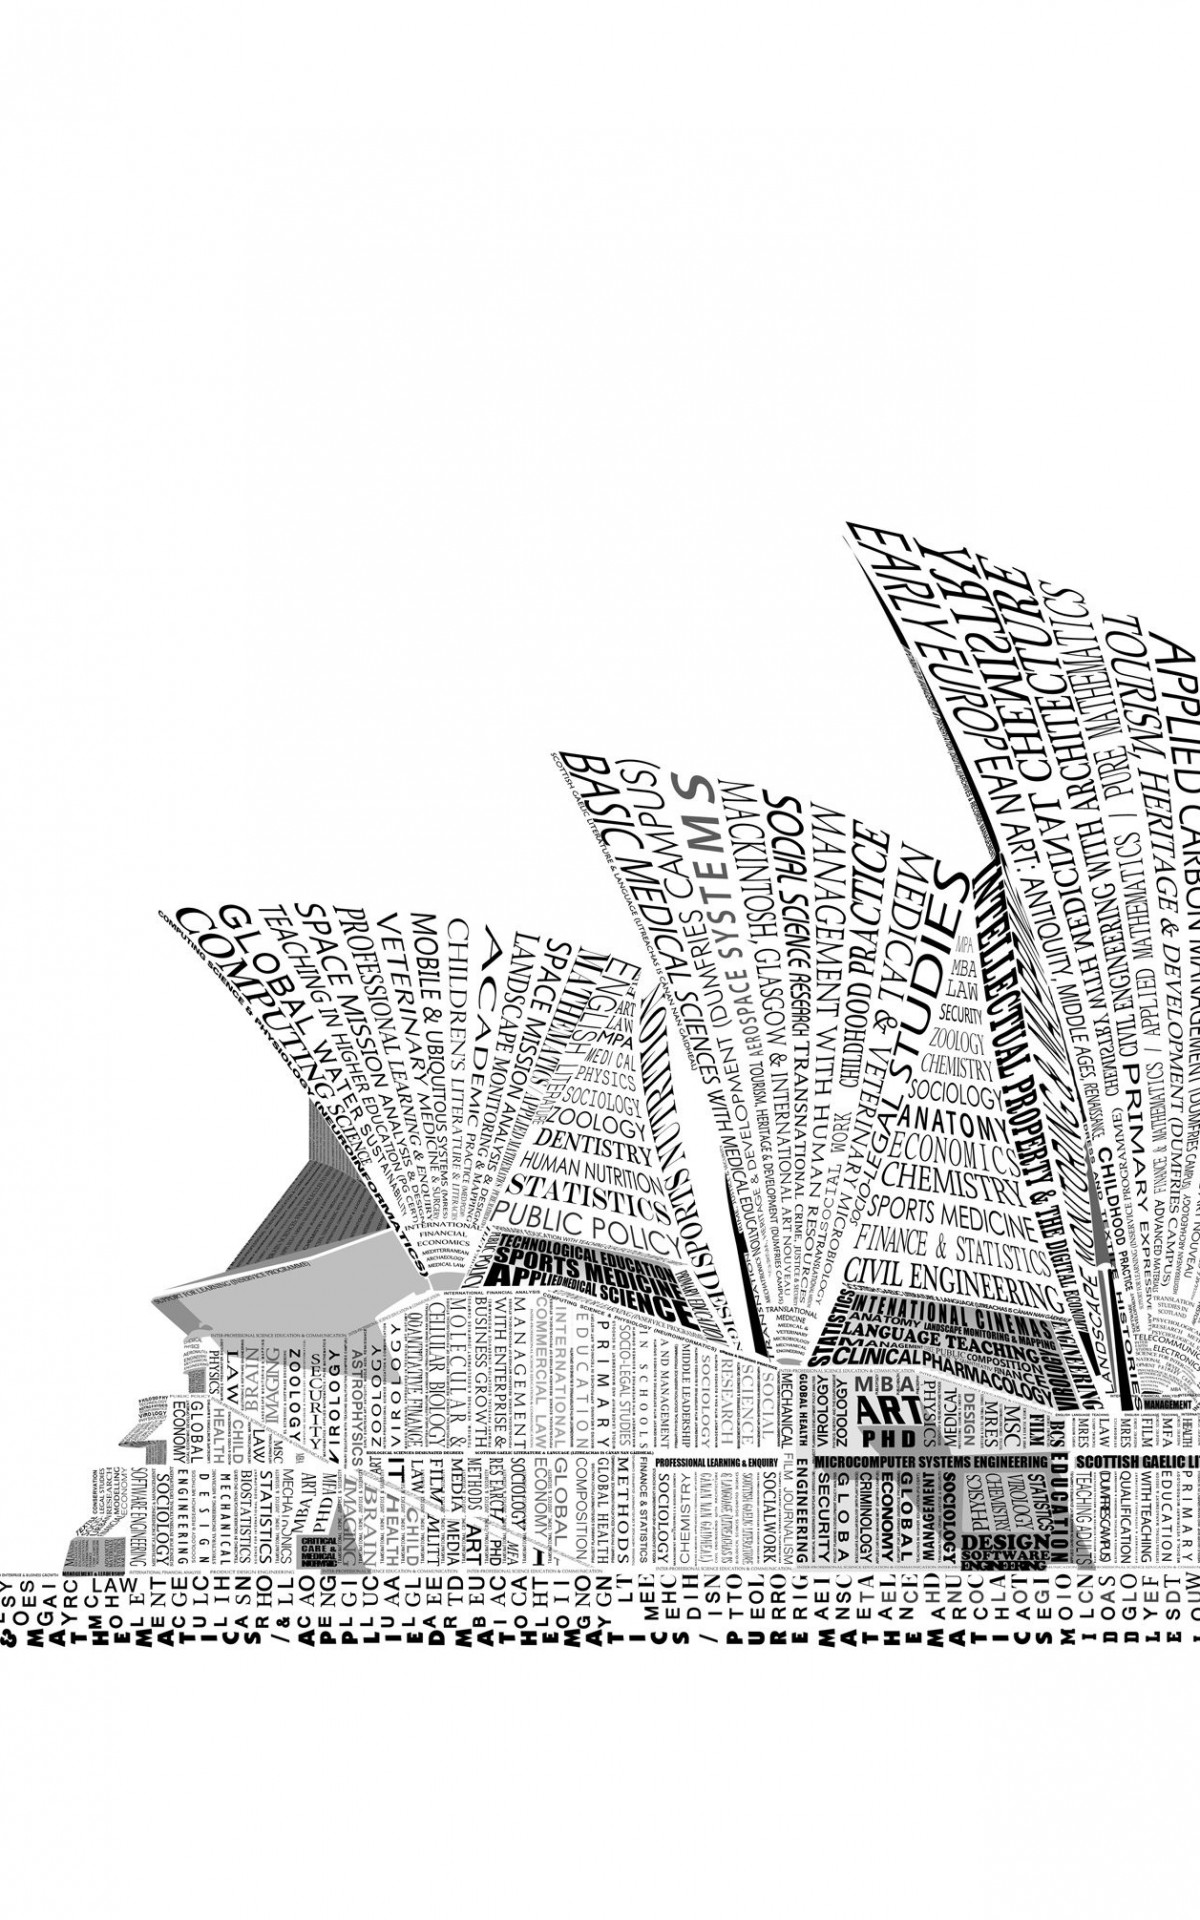 Opera House Sydney Typography Wallpaper for Amazon Kindle Fire HDX